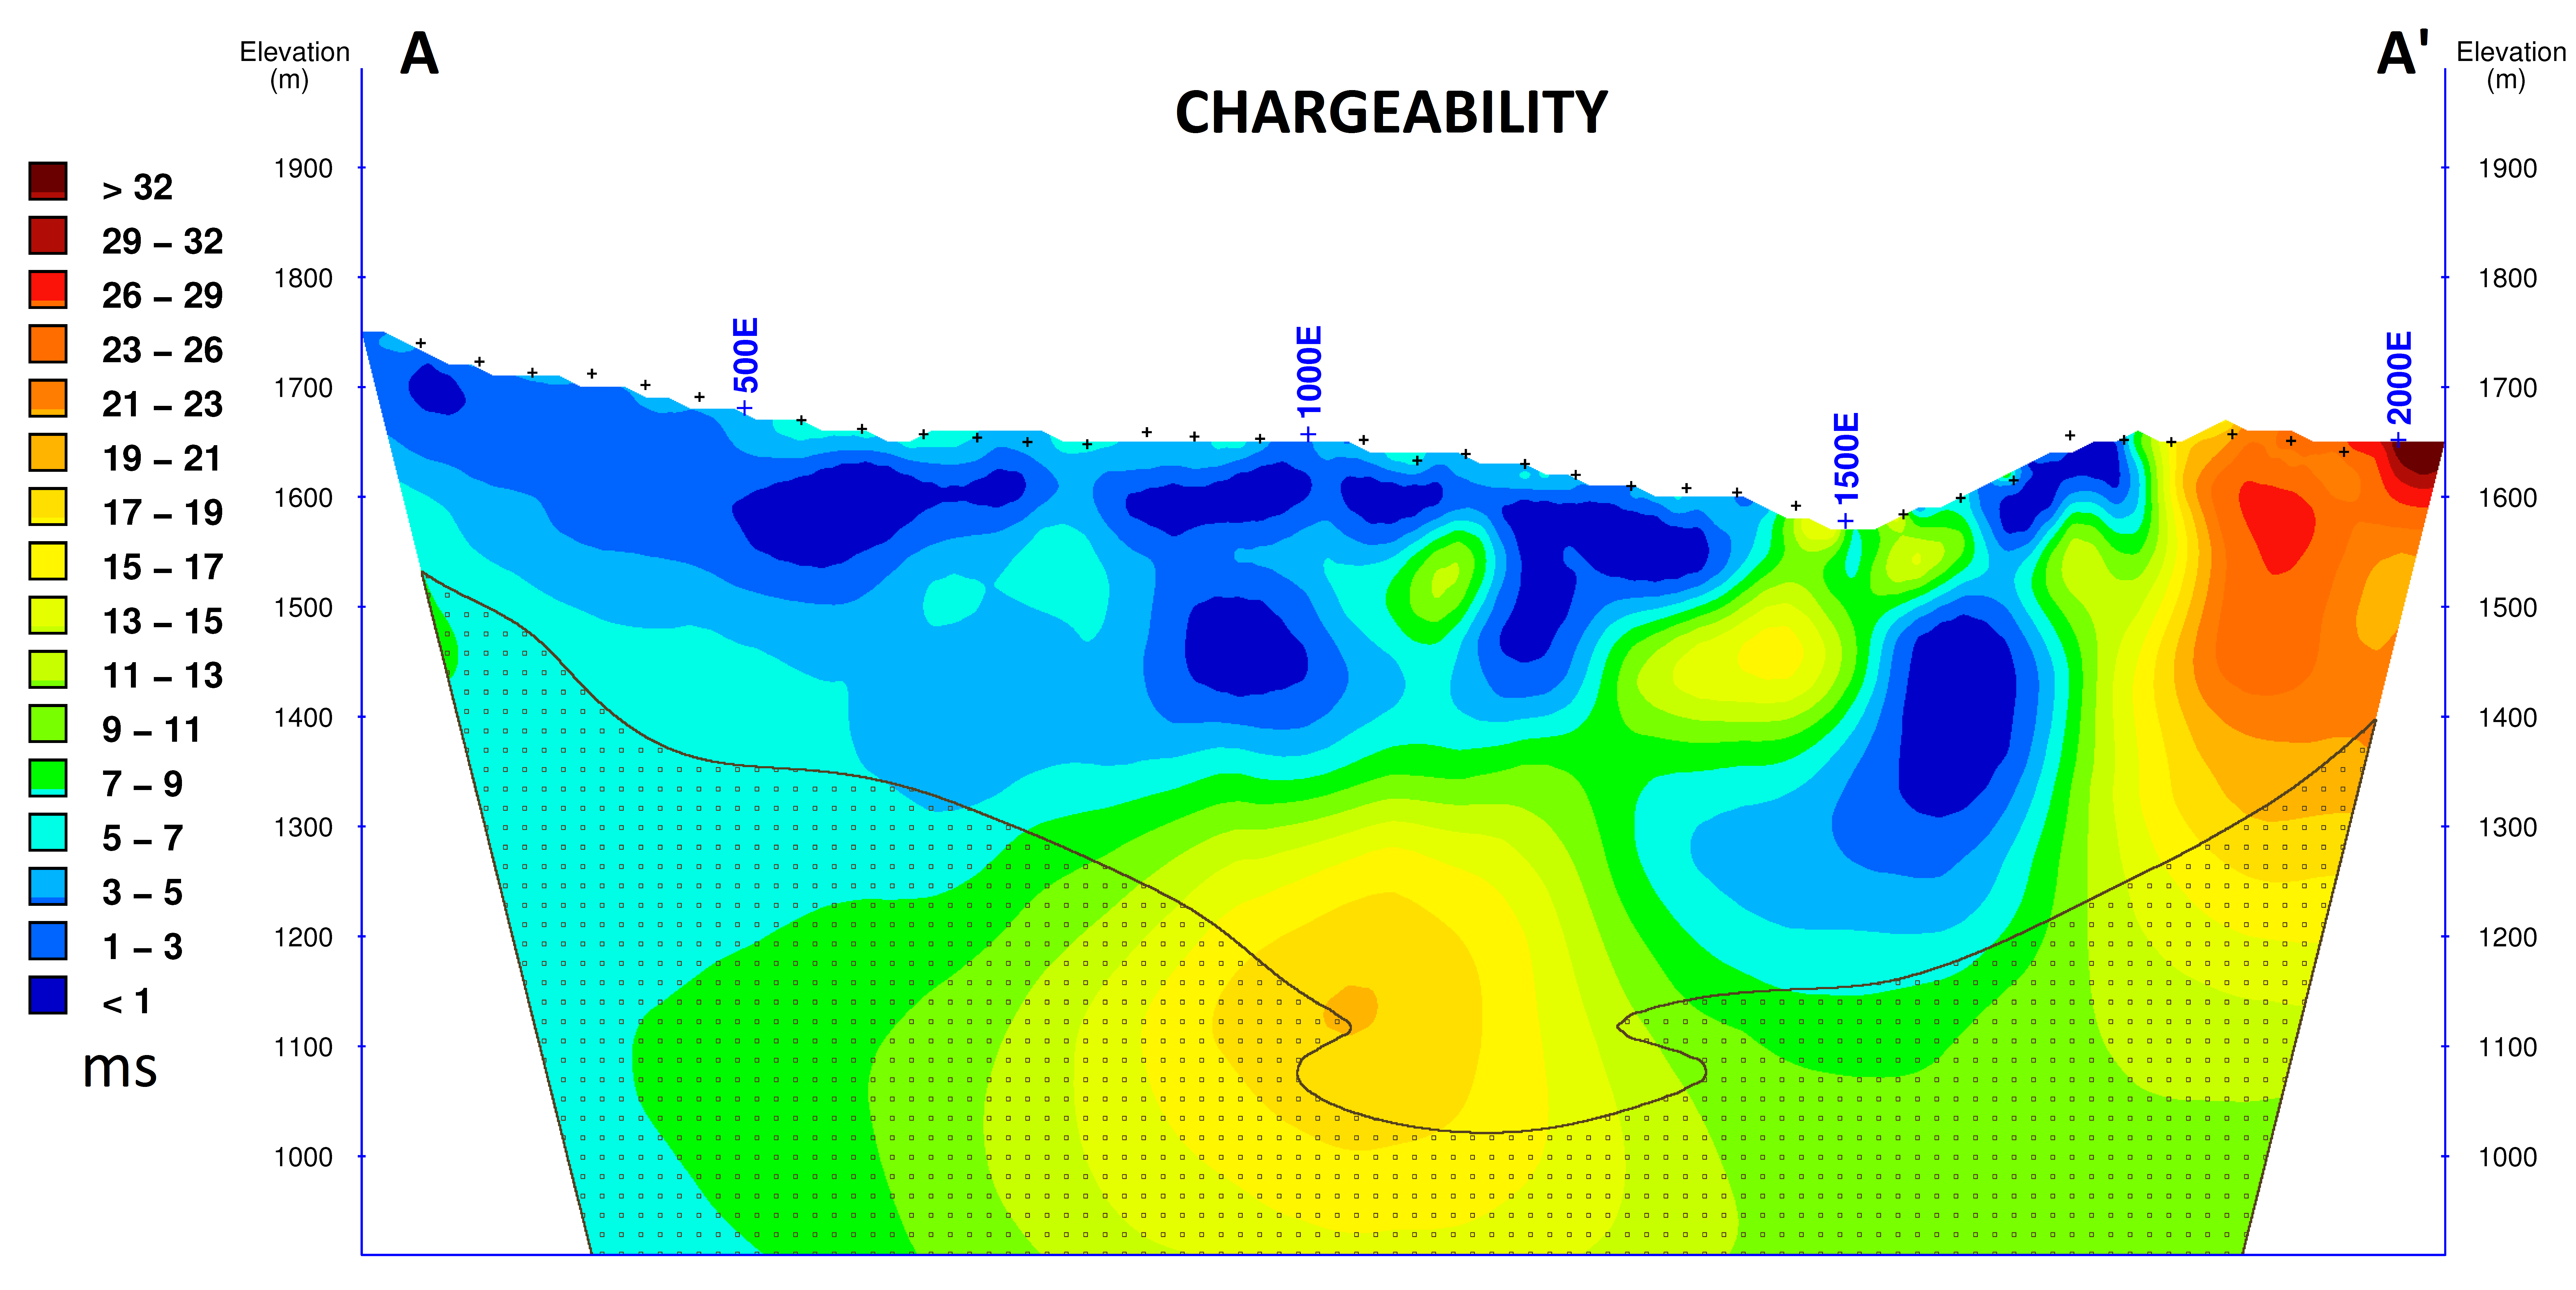 Chargeability